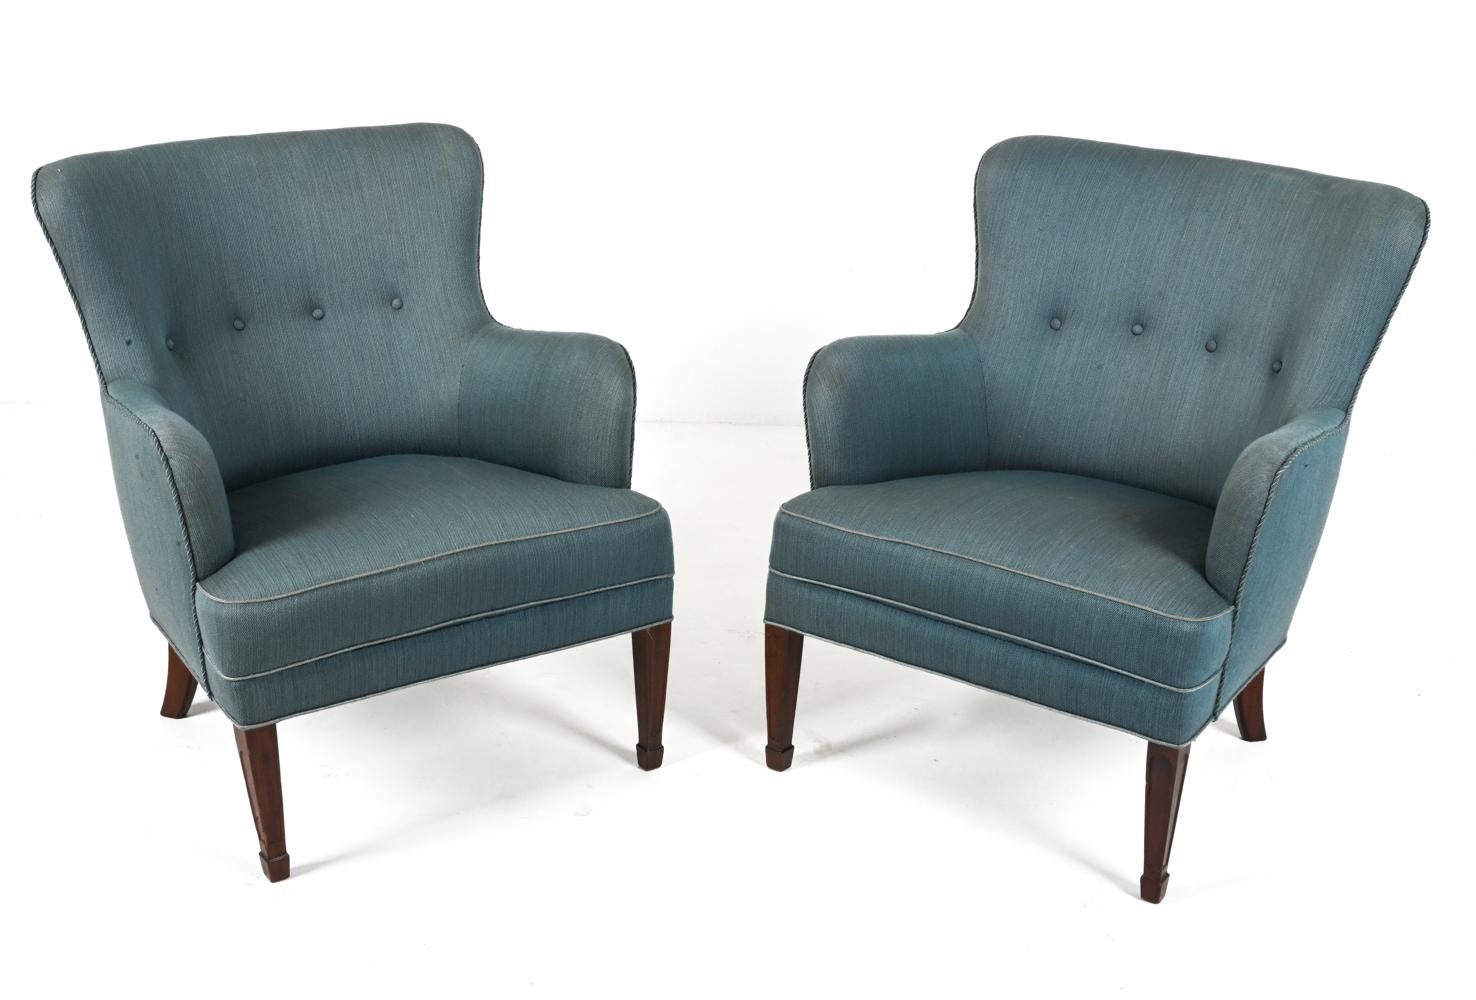 Presenting an exquisite pair of easy chairs produced by the renowned Frits Henningsen in the 1940's. Crafted with sophistication and attention to detail, these armchairs encapsulate the the essence of Danish Modern elegance. 

Solid mahogany legs